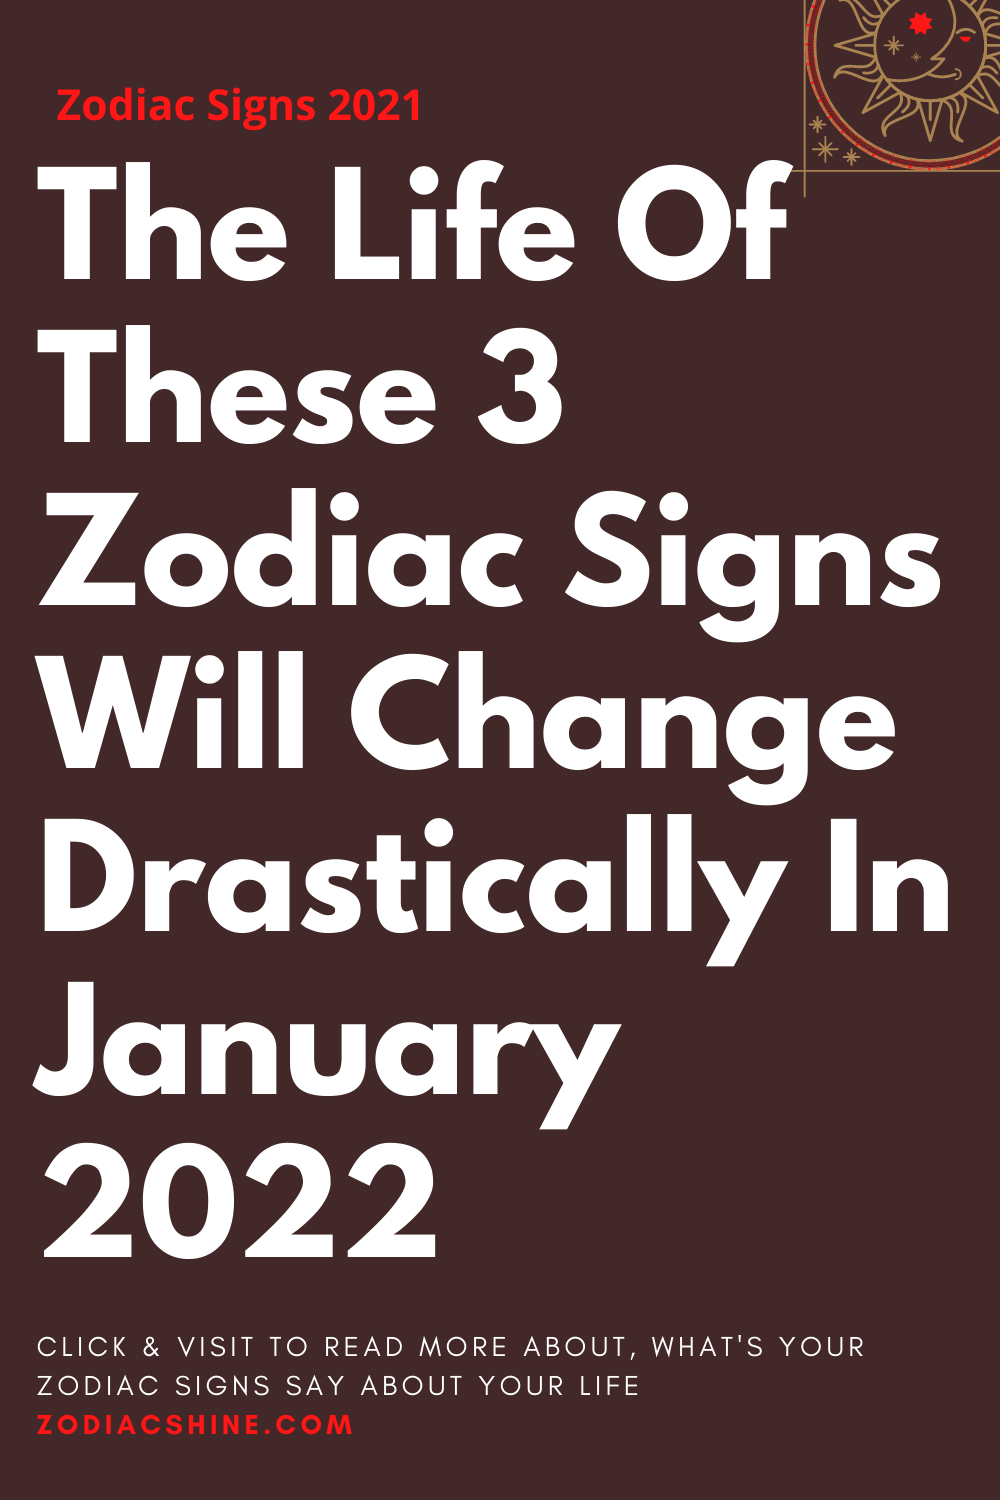 The Life Of These 3 Zodiac Signs Will Change Drastically In January 2022